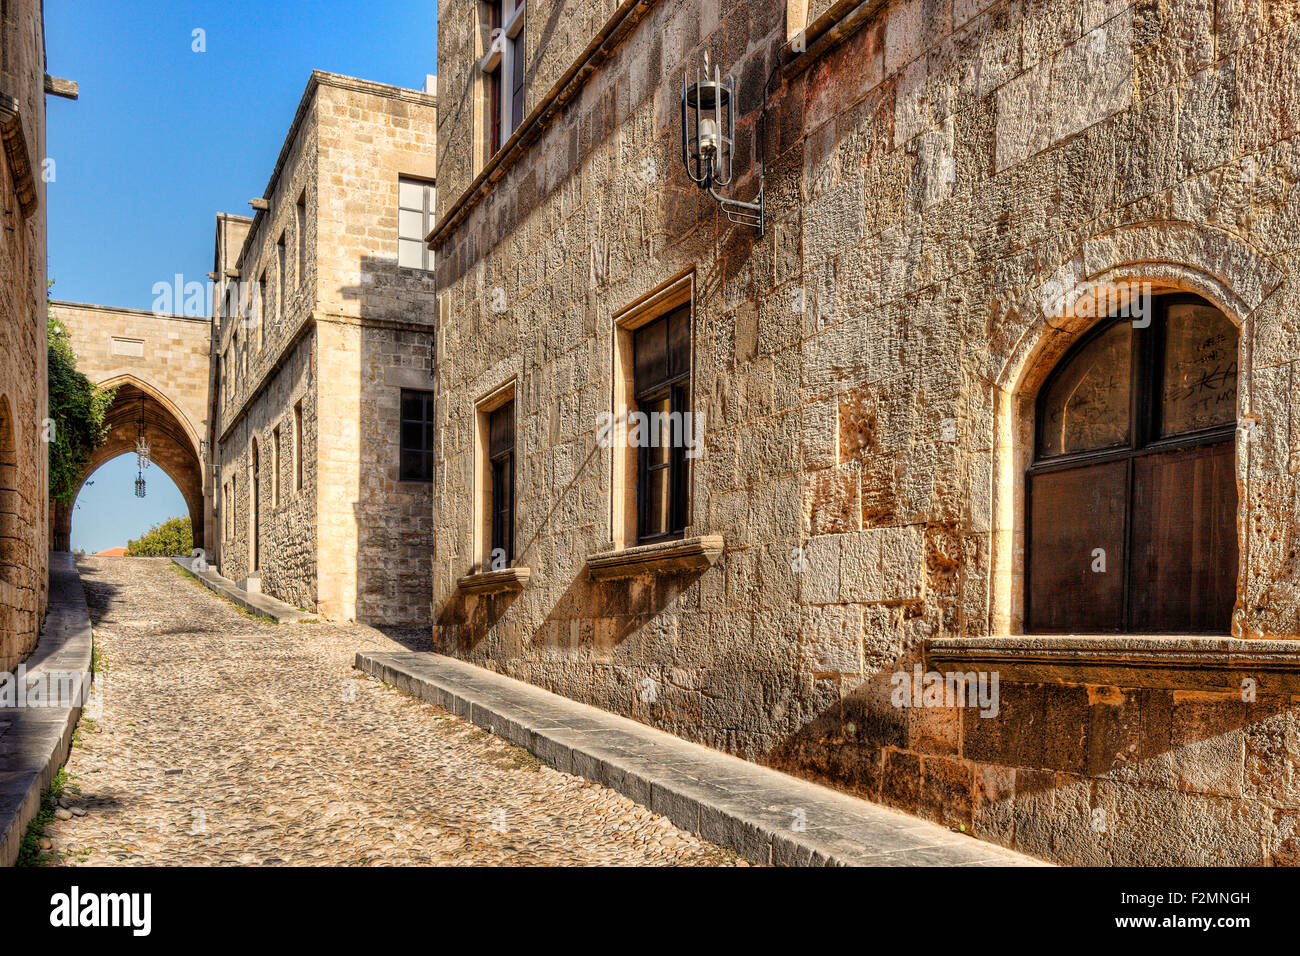 The Street of the Knights in Rhodes Greece is one of the best preserved and impressive medieval monuments in the world. Stock Photo